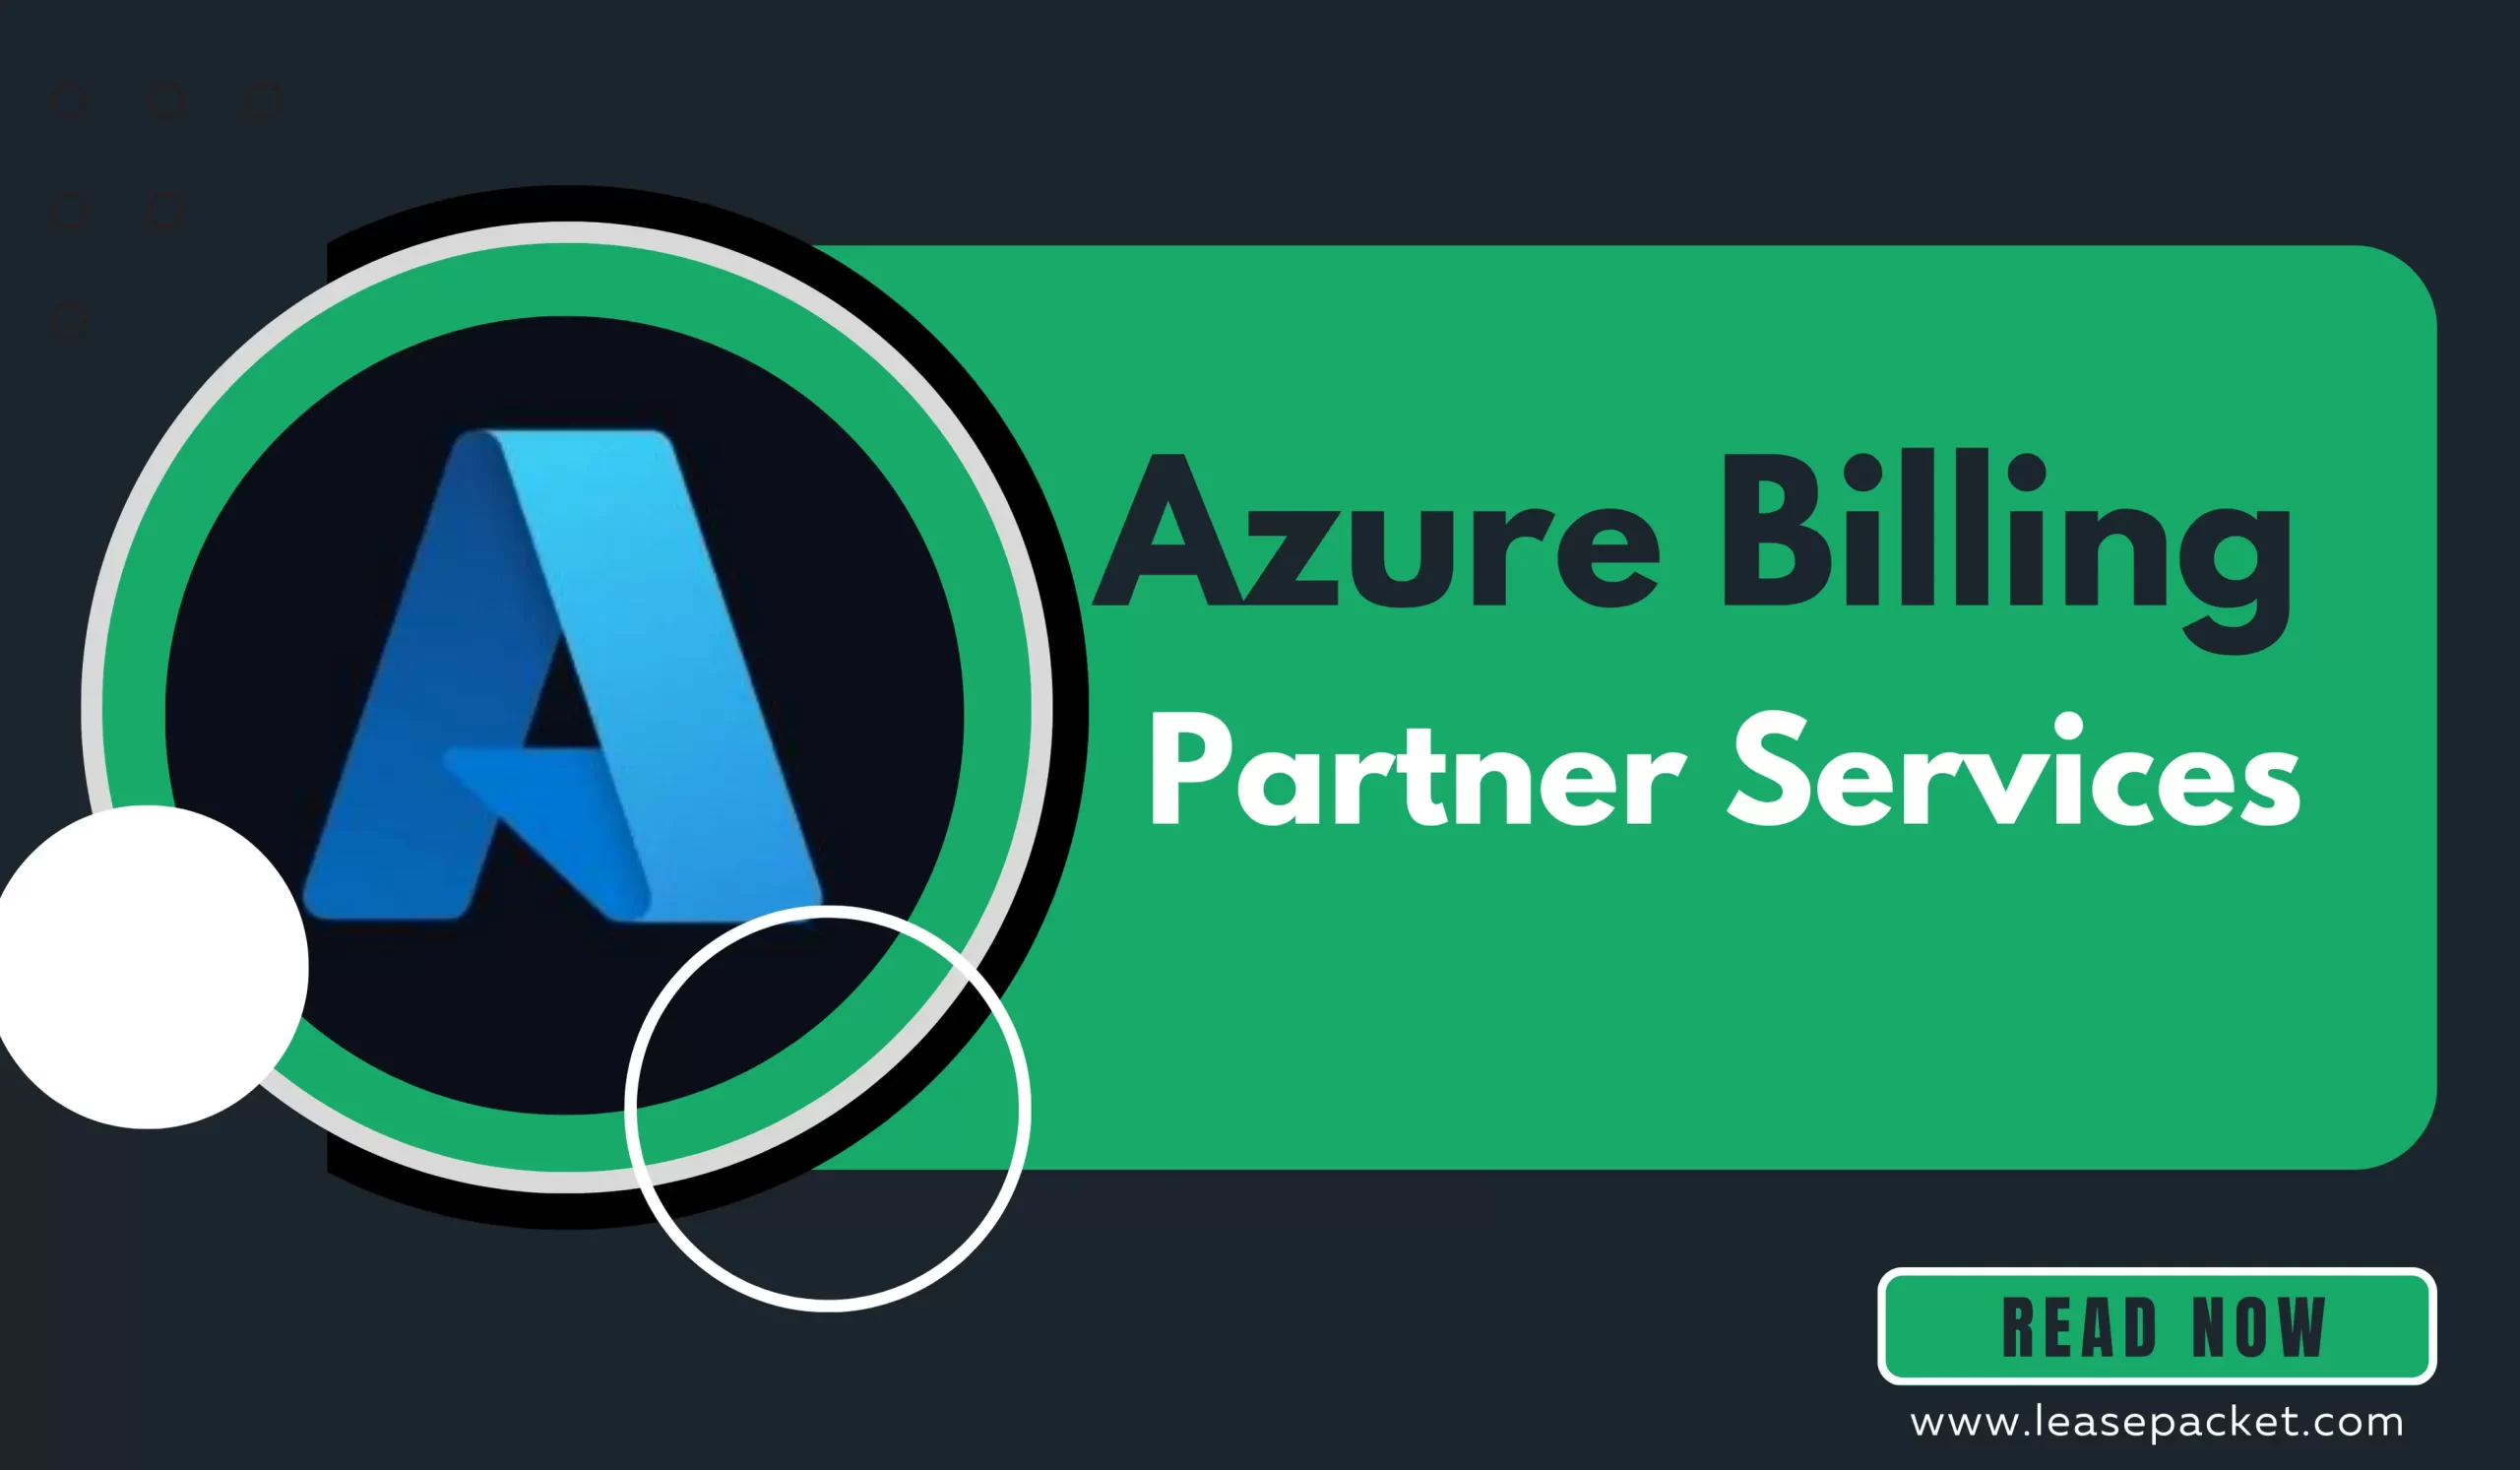 You are currently viewing Your Guide to Azure Billing Partner Services by Lease Packet